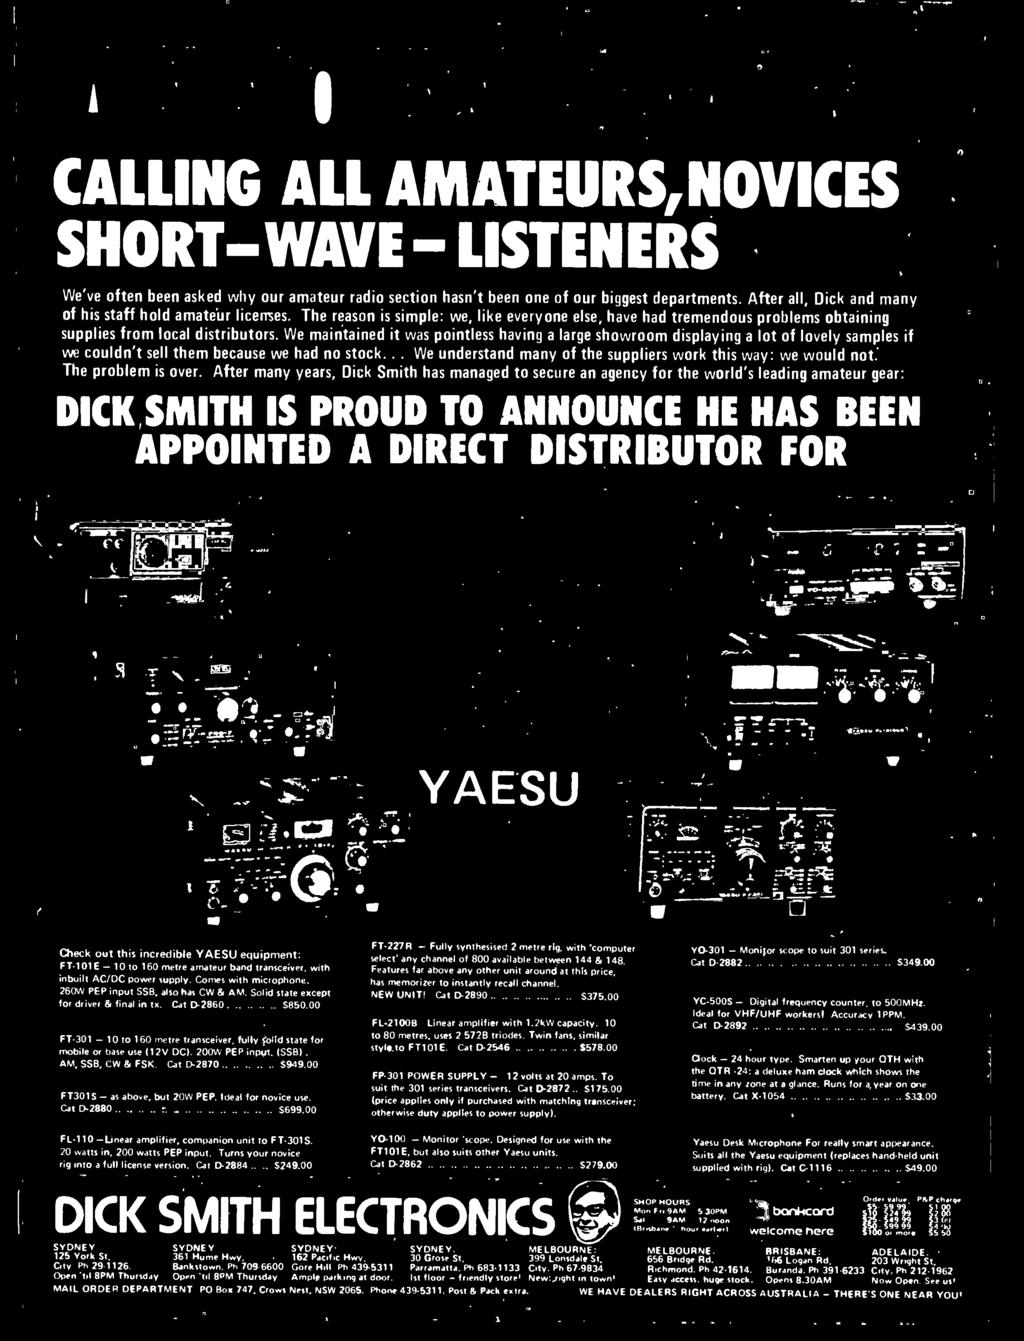 DICK SMITH IS PROUD TO ANNOUNCE HE HAS BEEN APPOINTED A DIRECT DISTRIBUTOR FOR. _ :=-p-: o...- _- YAESU =-.-- 717.'.